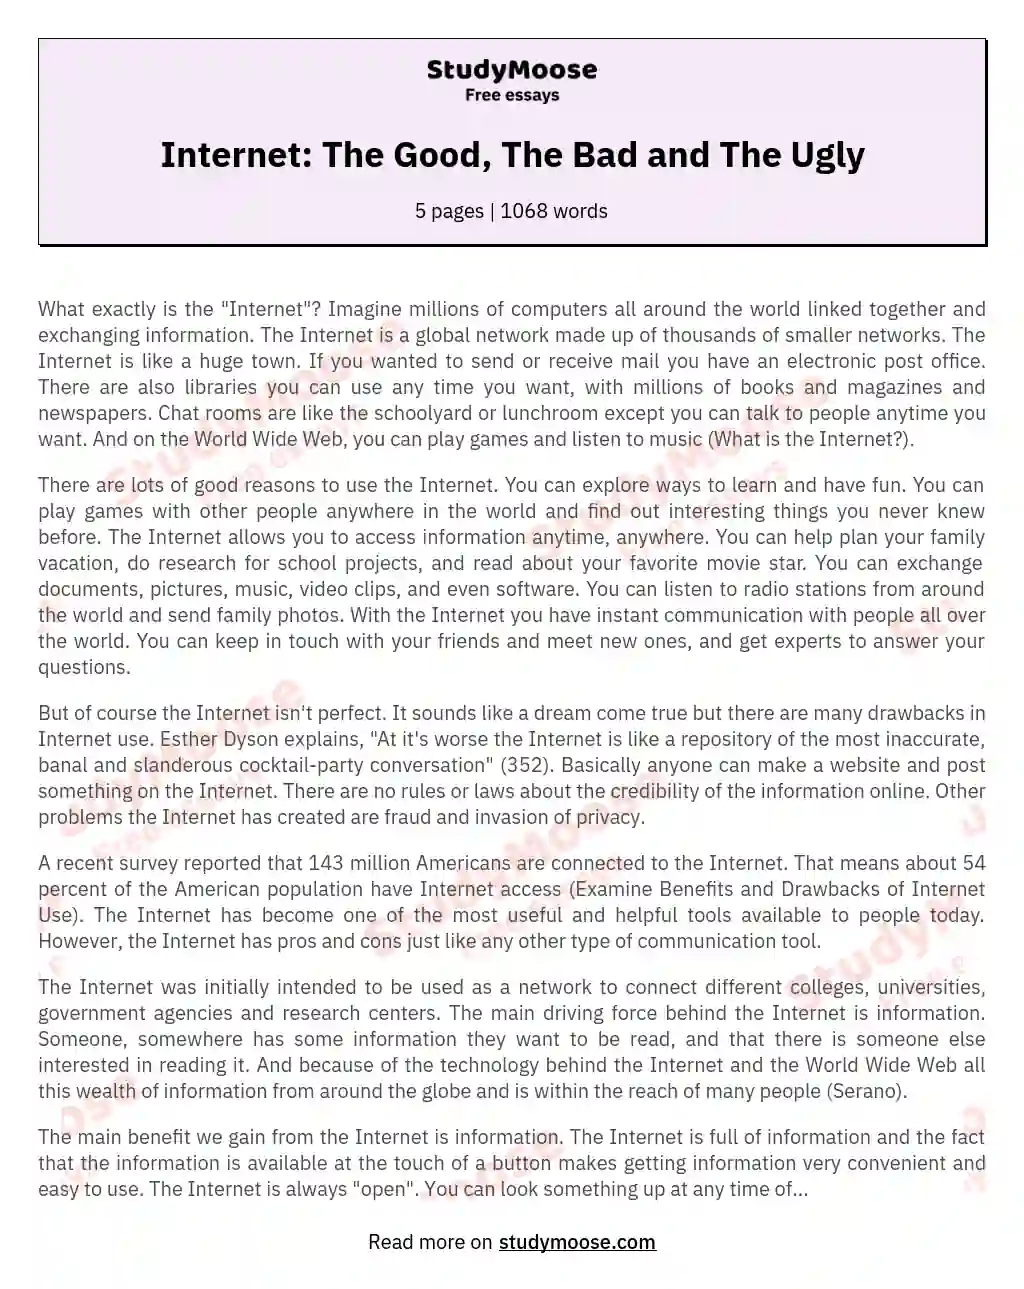 Internet: The Good, The Bad and The Ugly essay